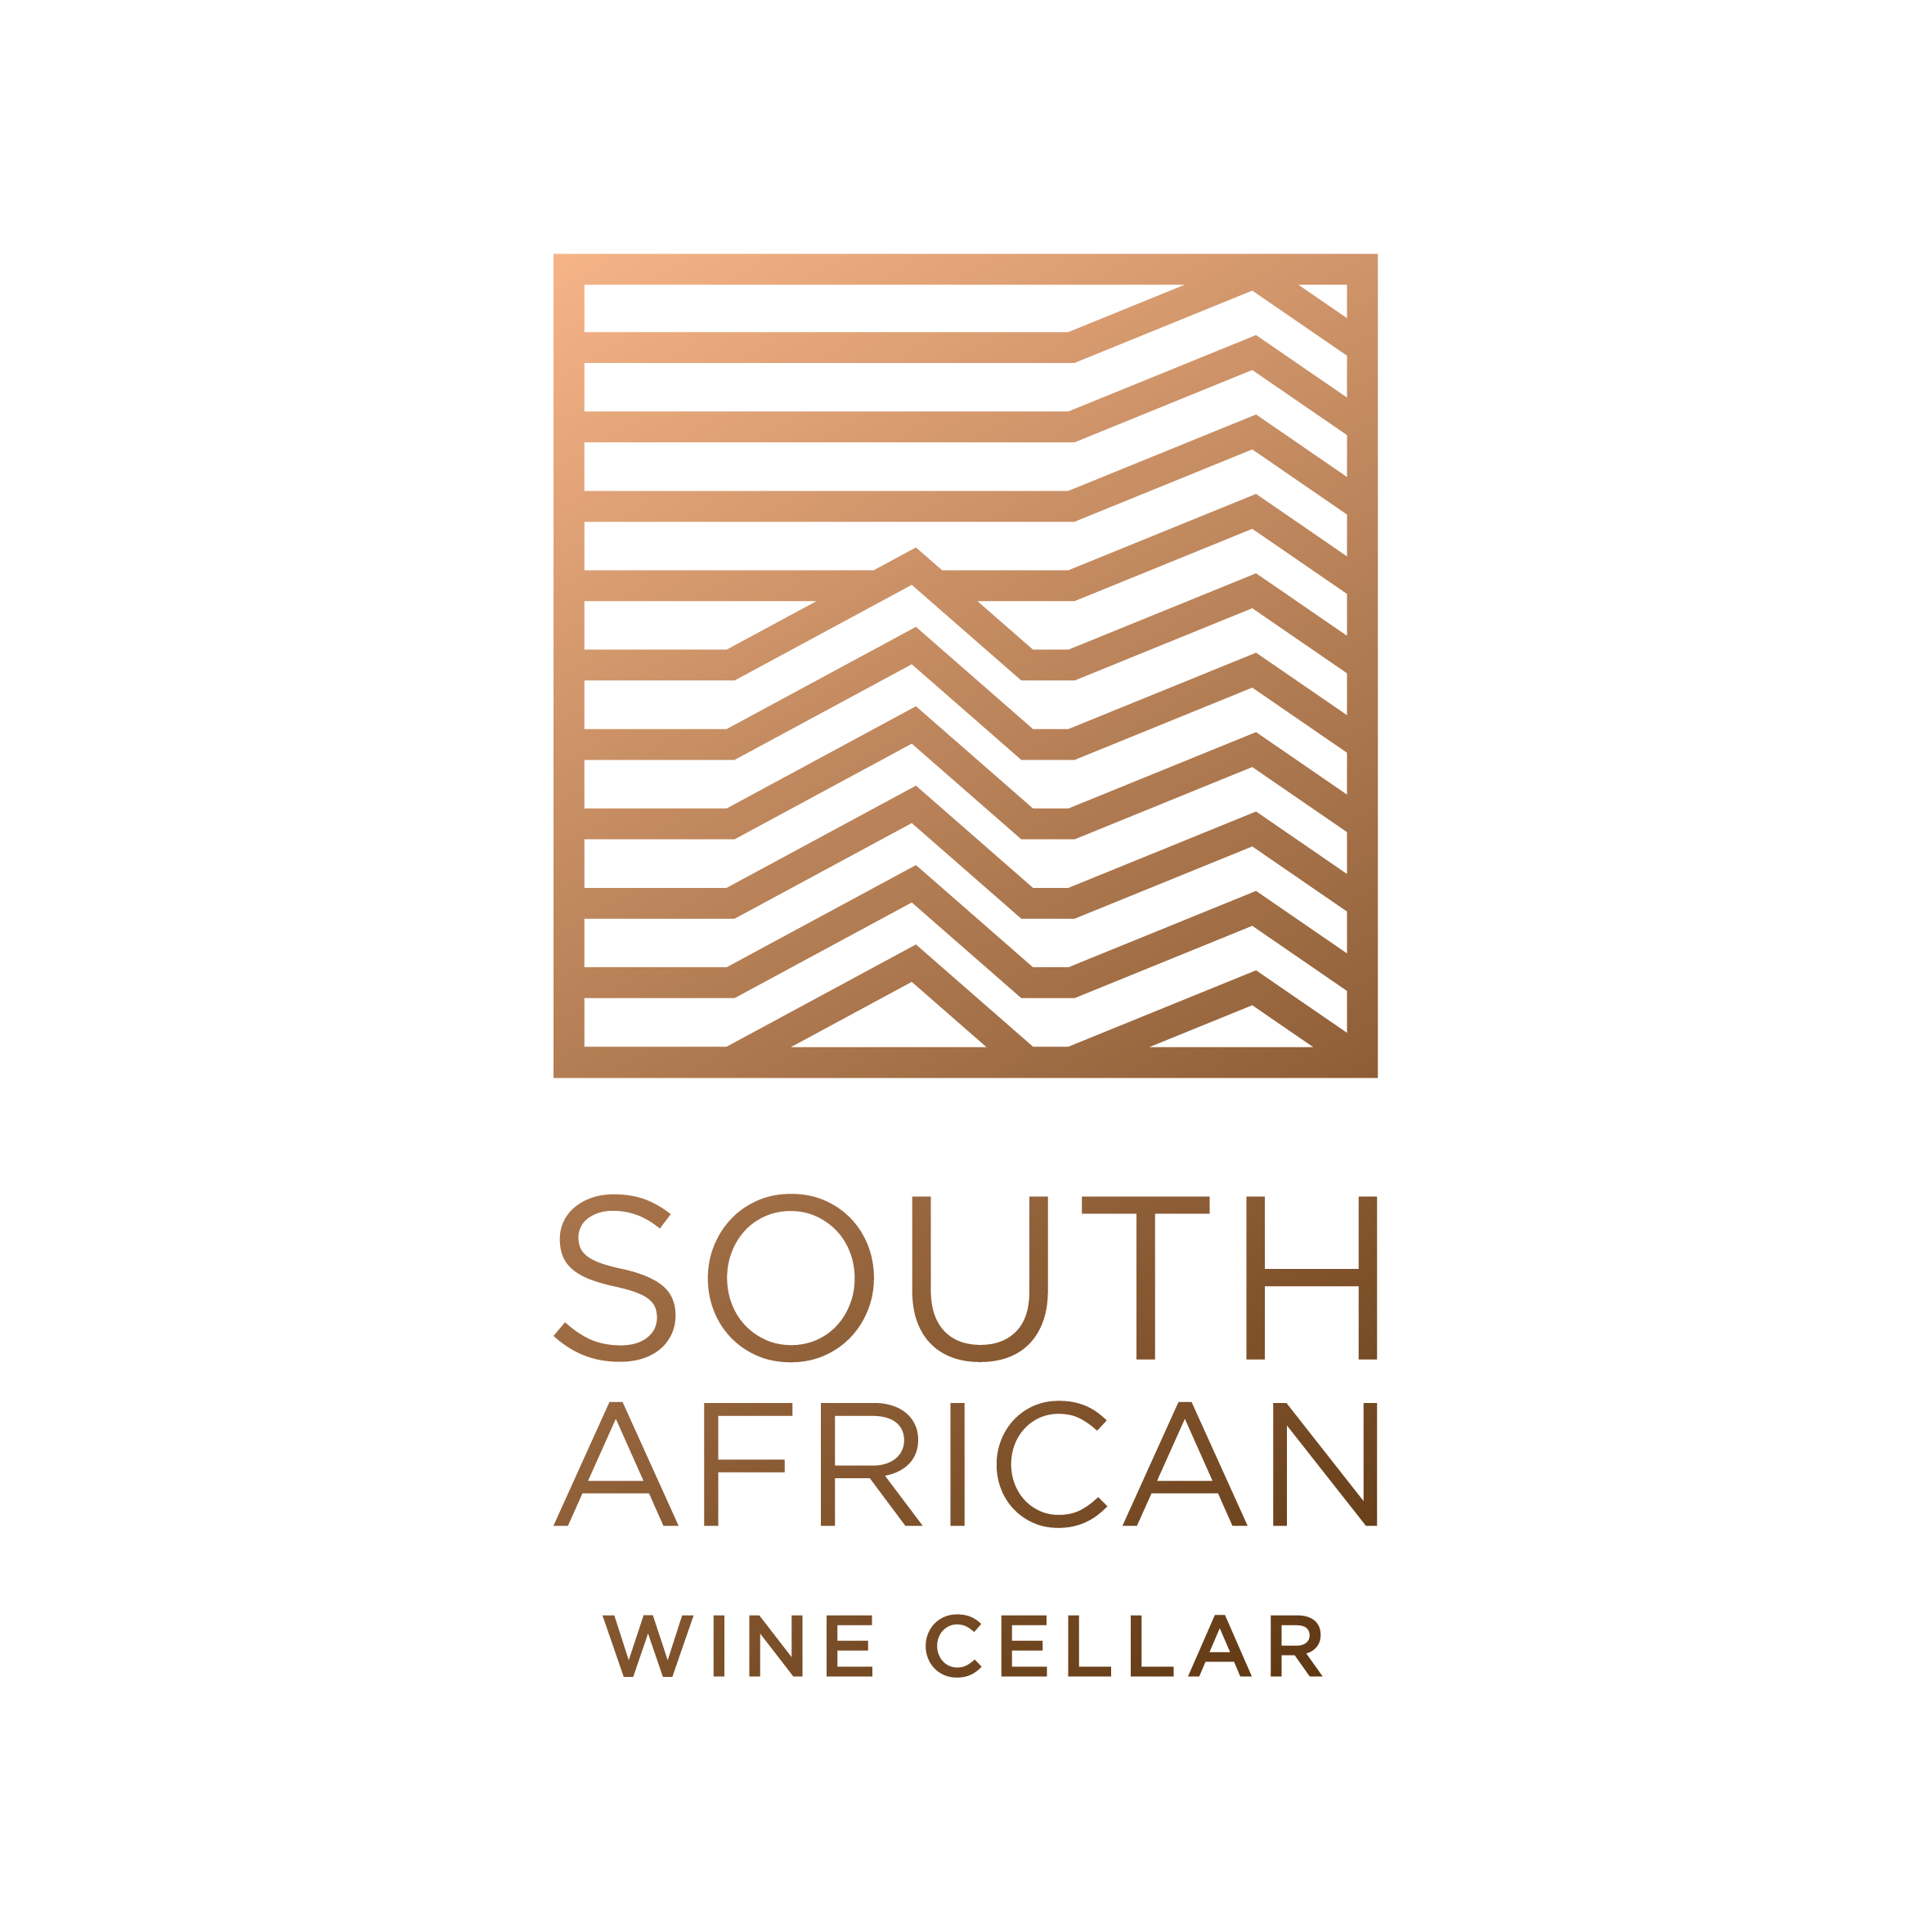 South African Wine Cellar